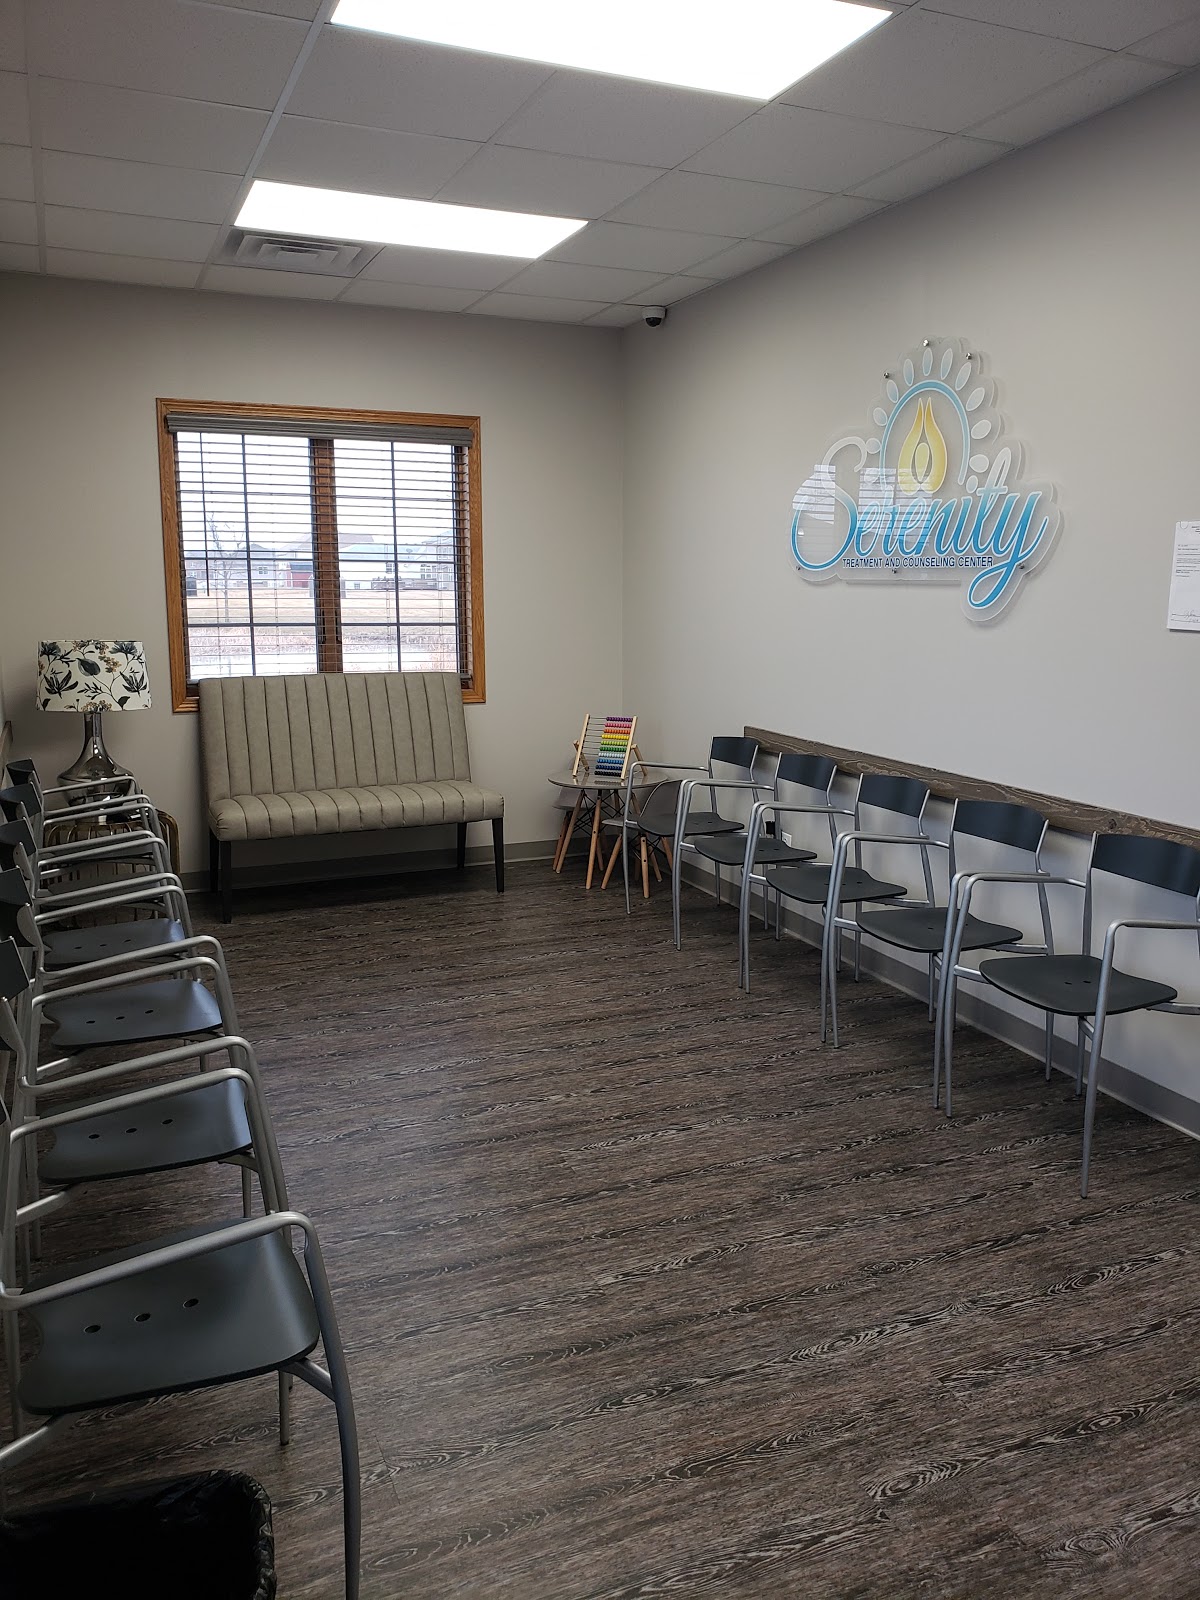 Serenity Treatment and Counseling Center